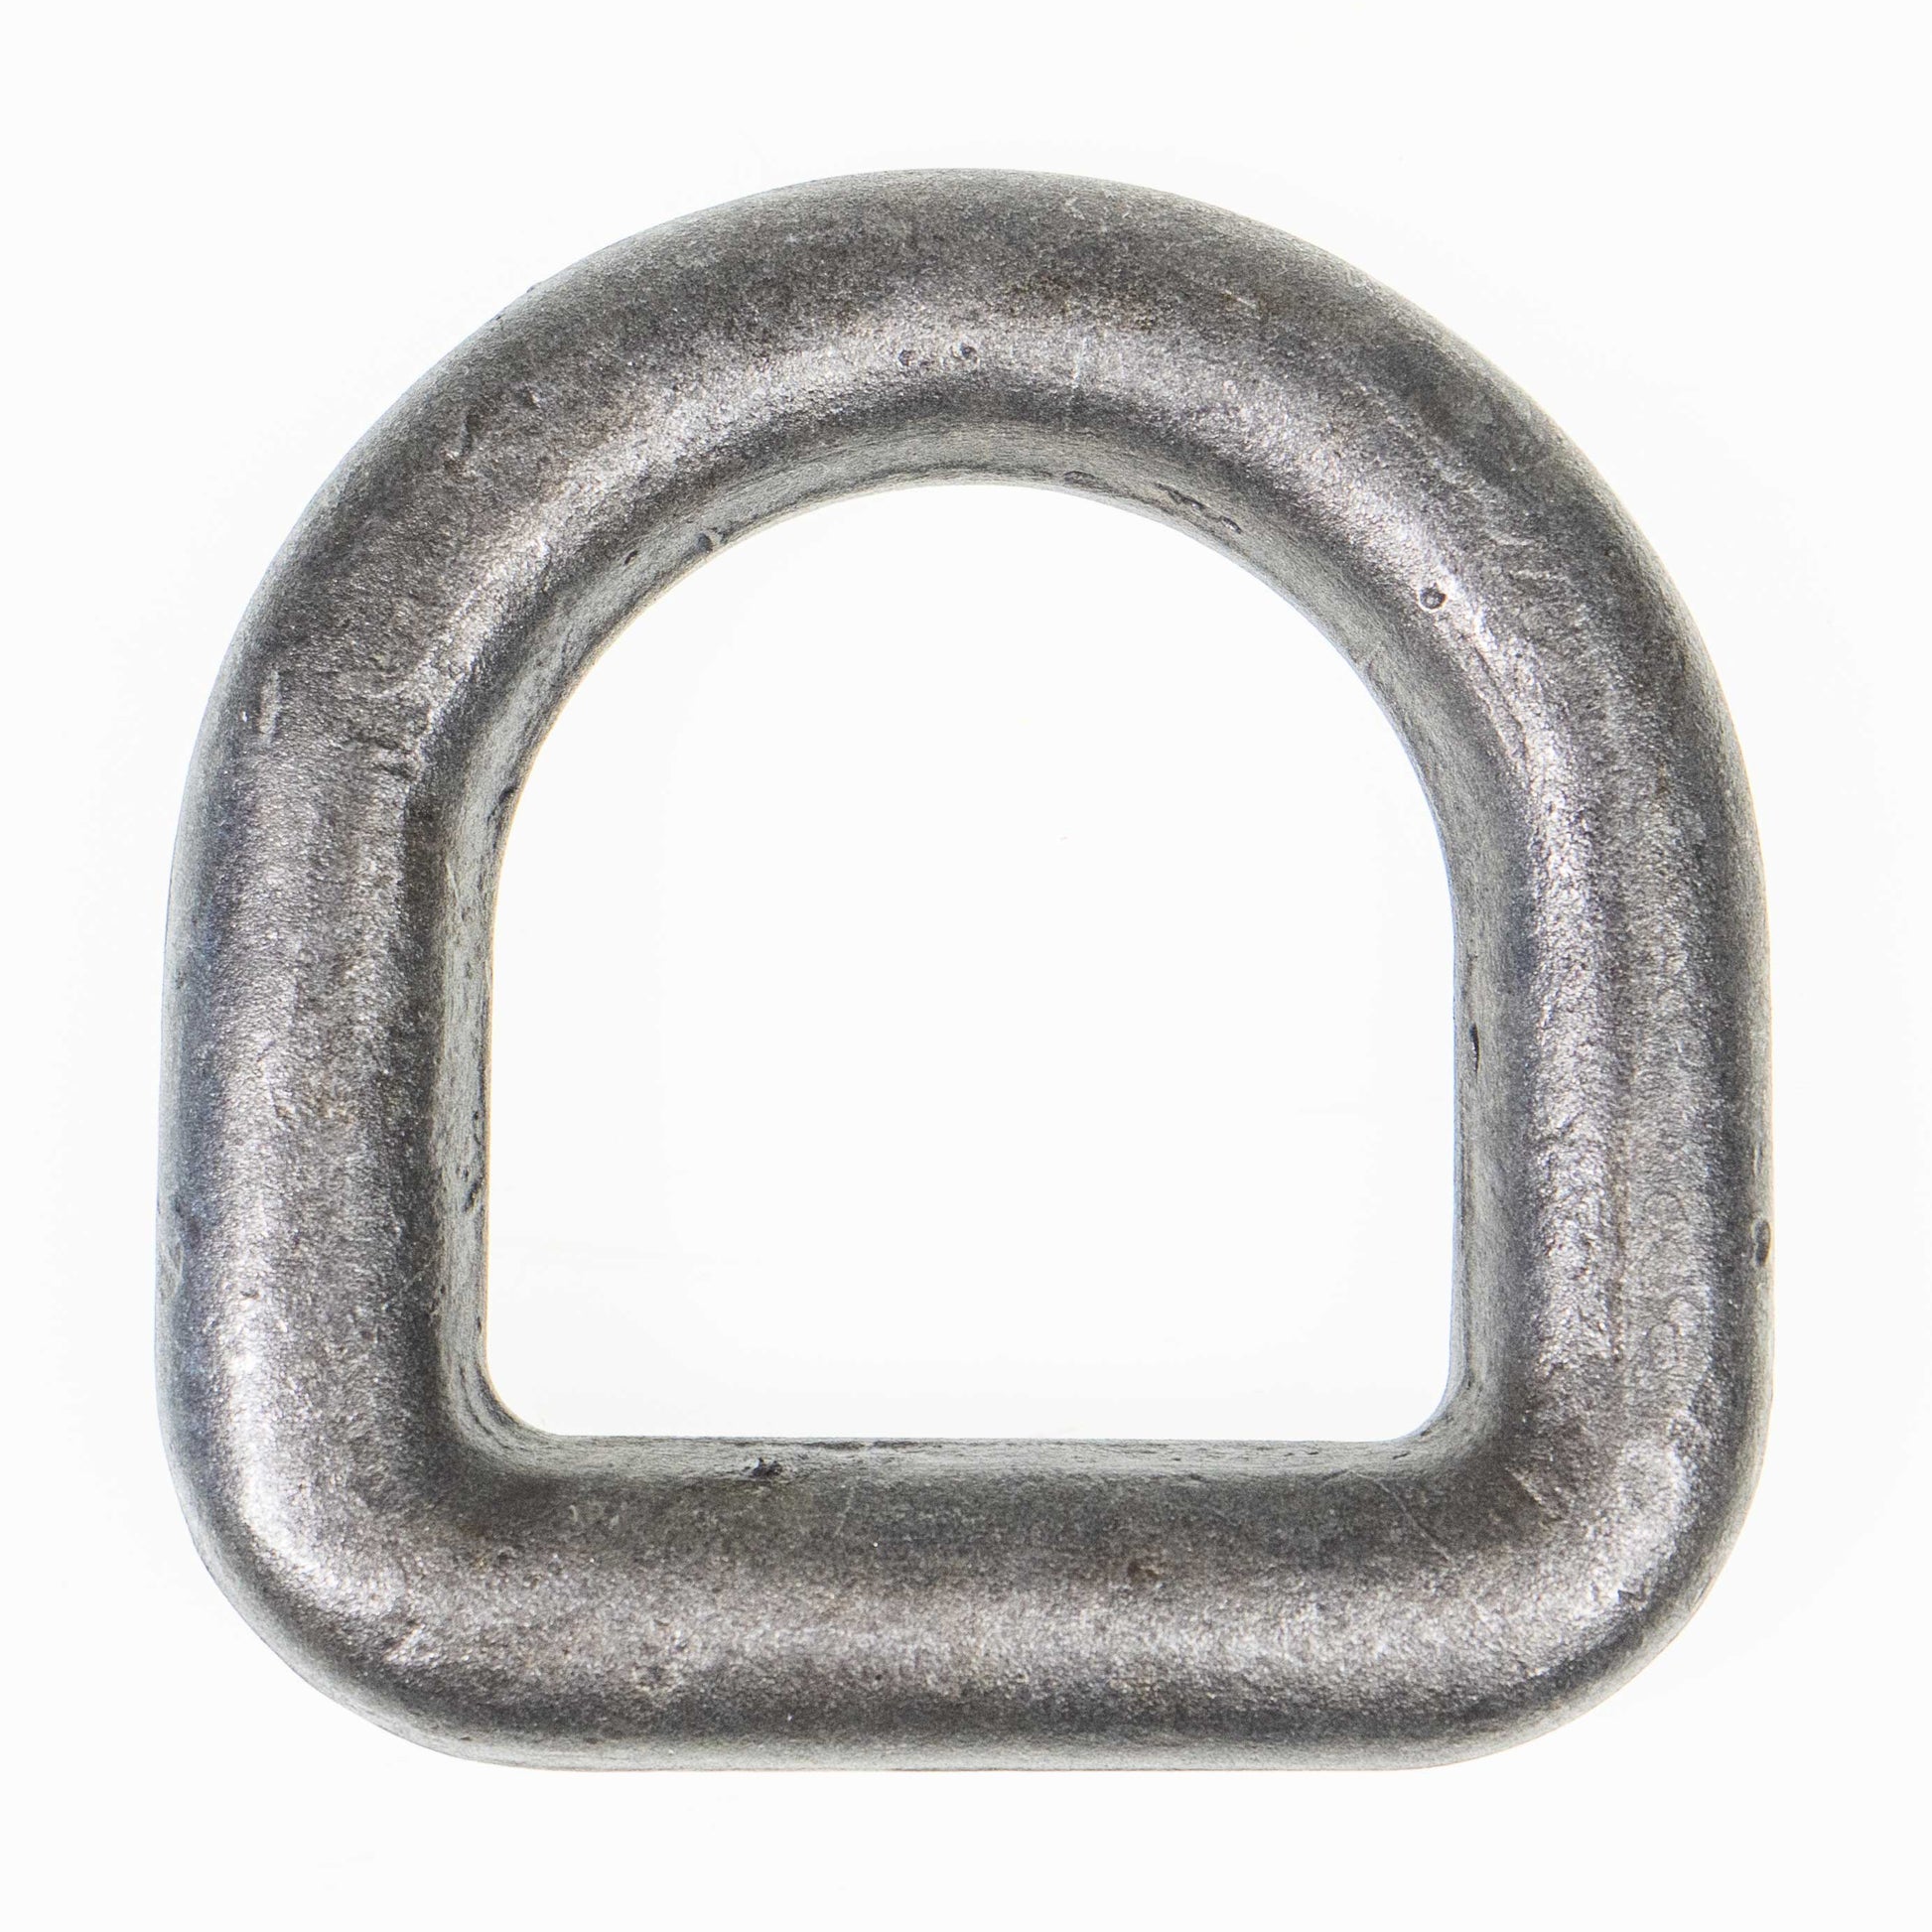 1 inch Lashing Forged Mounting Ring 47000 lbs D RING ONLY image 2 of 5